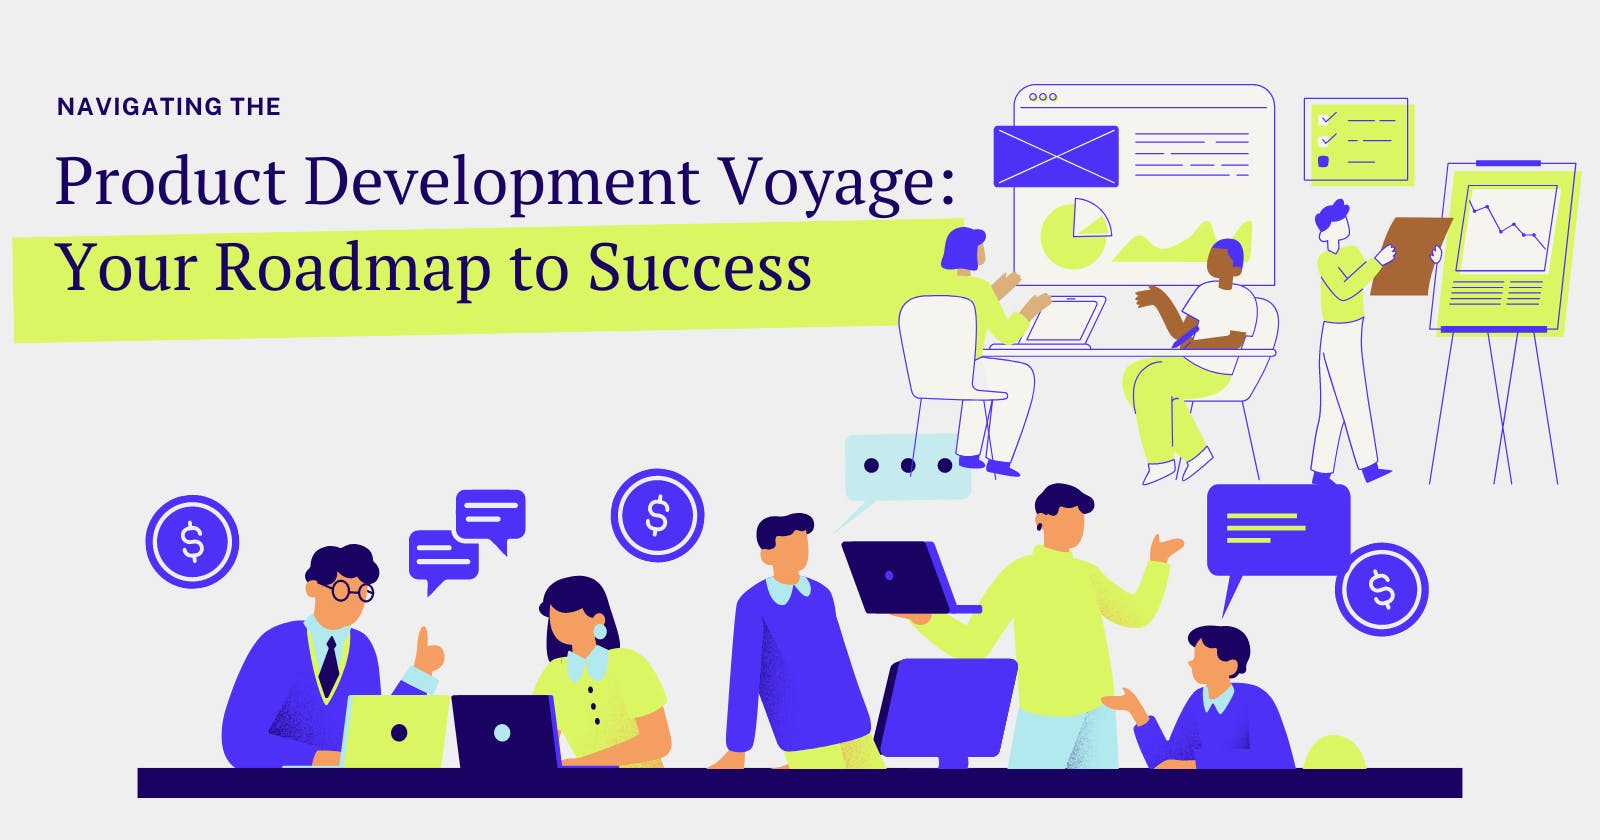 Navigating the Product Development Voyage: Your Roadmap to Success